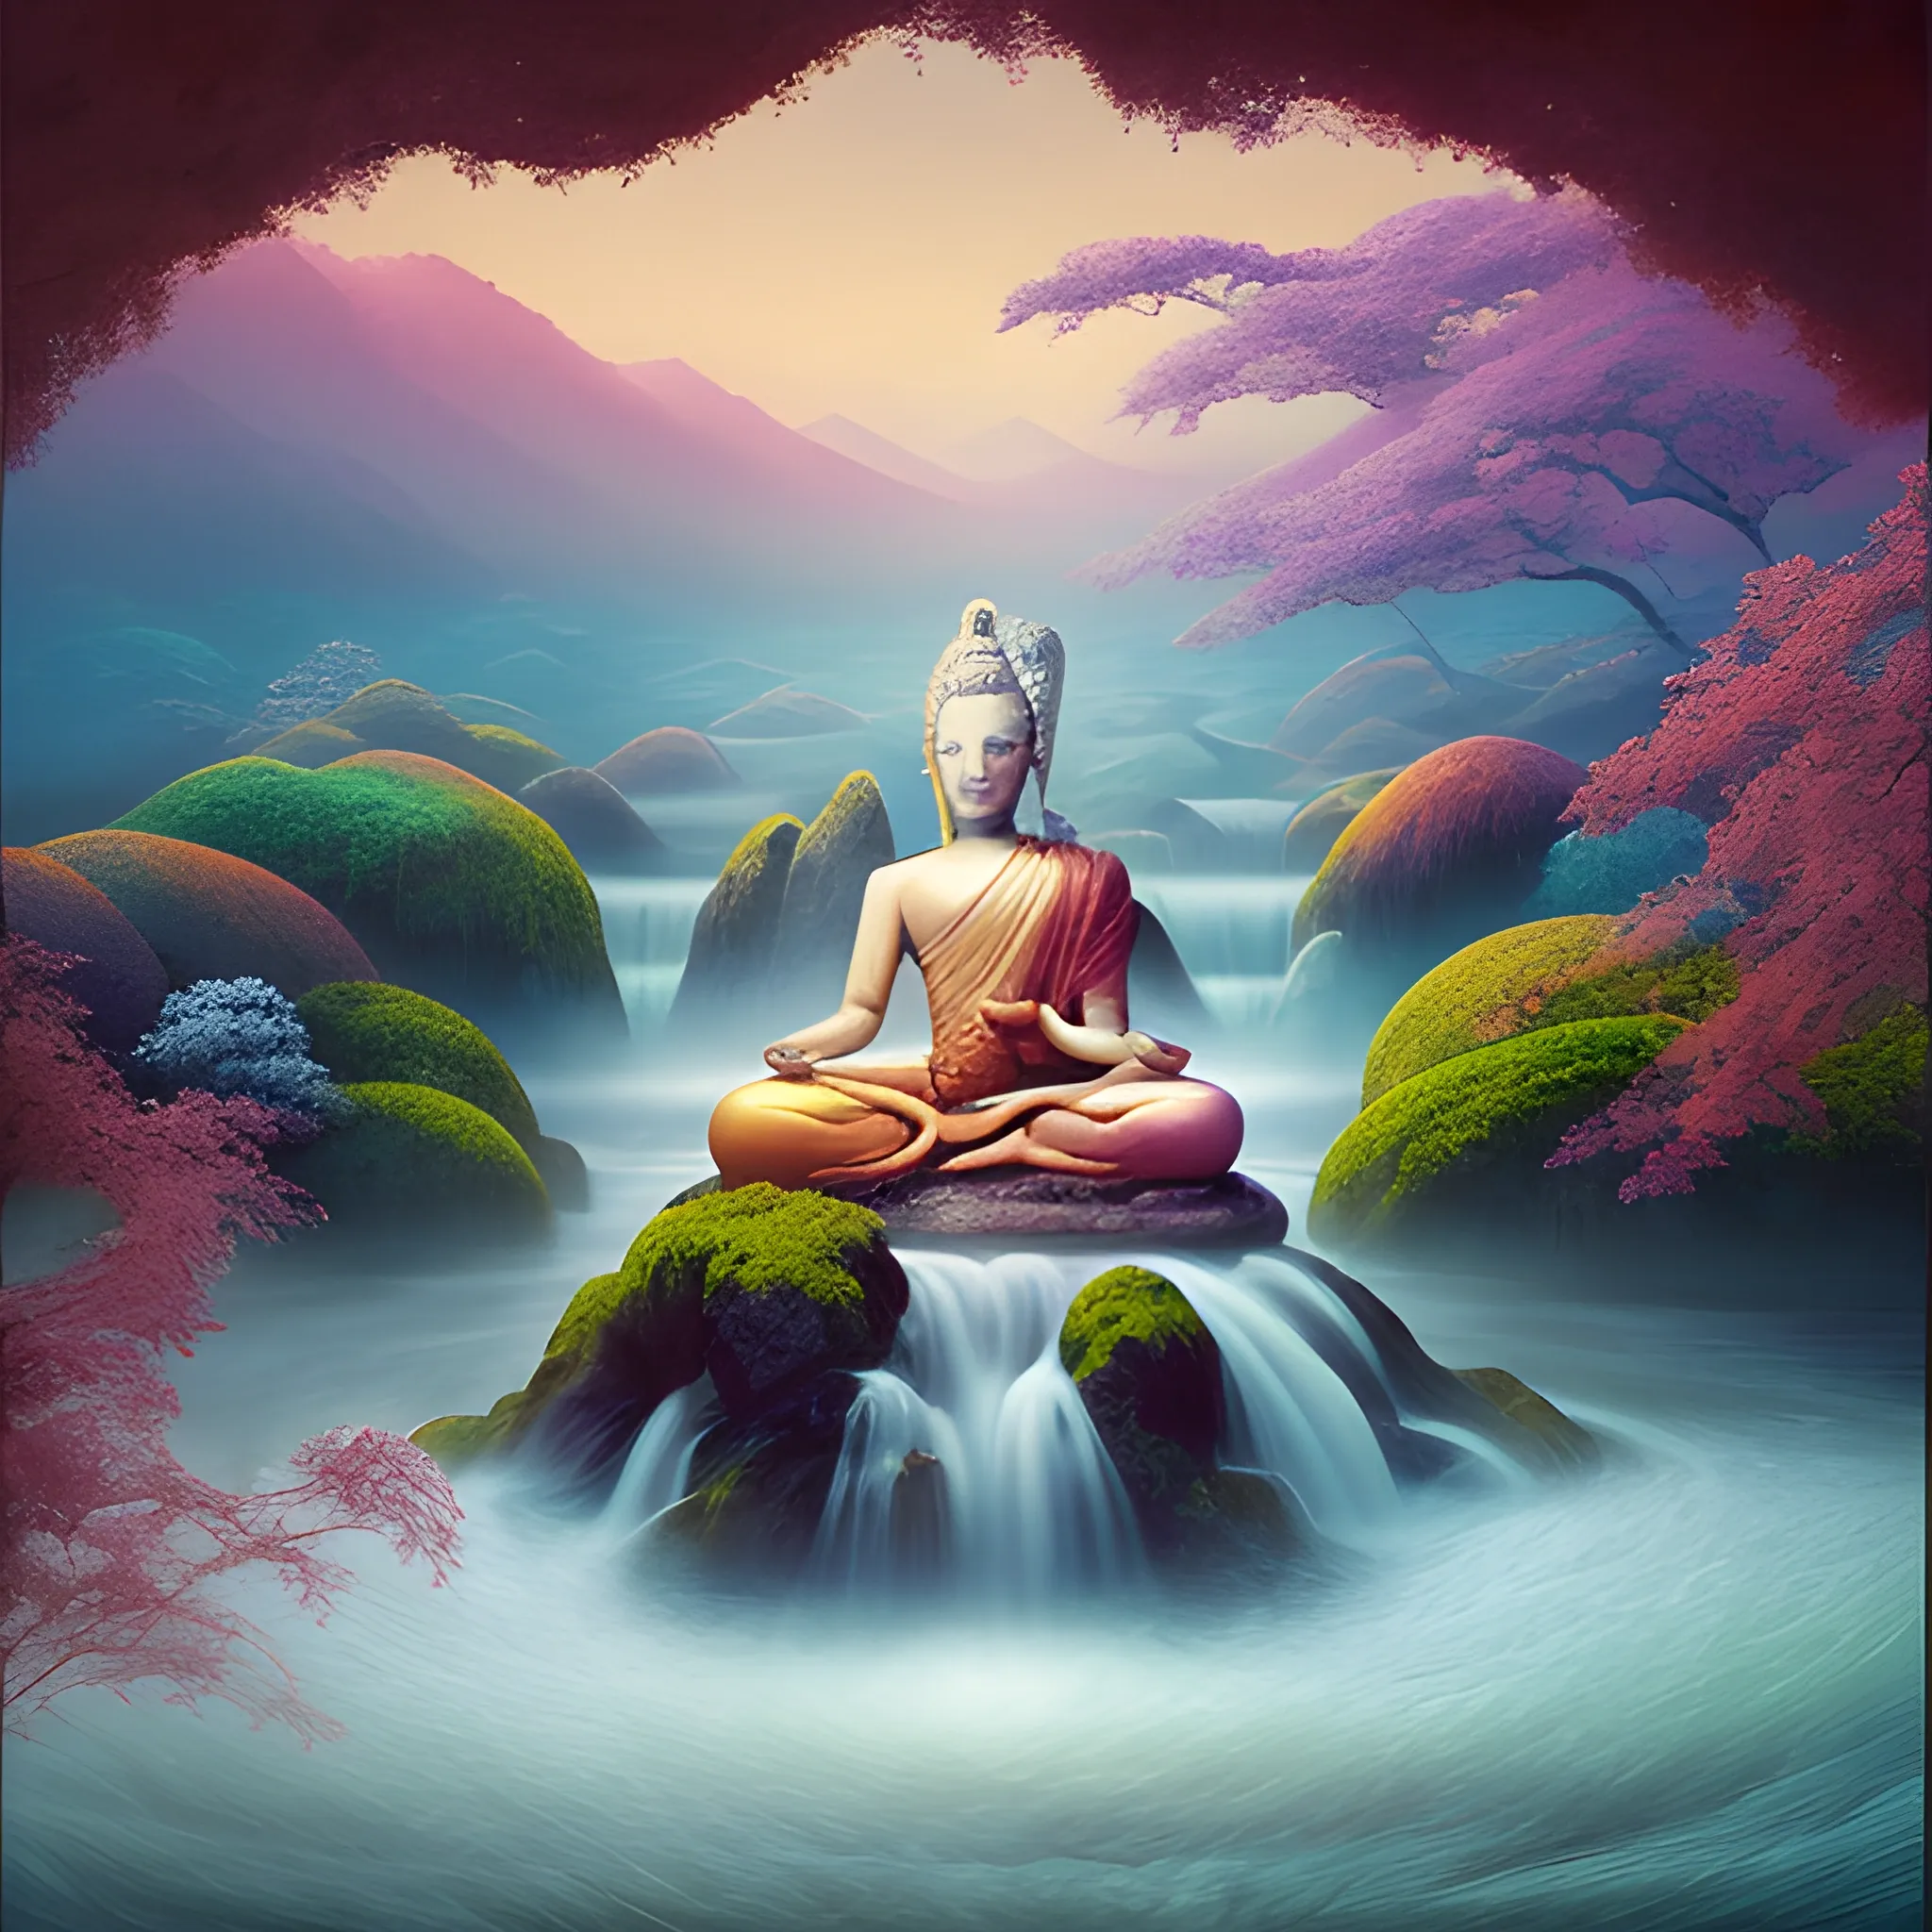 (by Ananta Mandal (and Andrew Biraj:0.5)), (in the style of nihonga), Style: Abstract, Medium: Digital illustration, Subject: A Bodhisattva of Compassion in the middle of picture, An otherworldly landscape with floating islands, cascading waterfalls, and vibrant flora and fauna. Camera Angle: Overhead shot capturing the vastness and intricate details of the scene. The colors are saturated, and the lighting creates a warm and ethereal atmosphere. The painting is highly detailed, with every brushstroke capturing the complexity of the imaginary world., (high quality), (detailed), (masterpiece), (best quality), (highres), (extremely detailed), (8k), seed:792315689